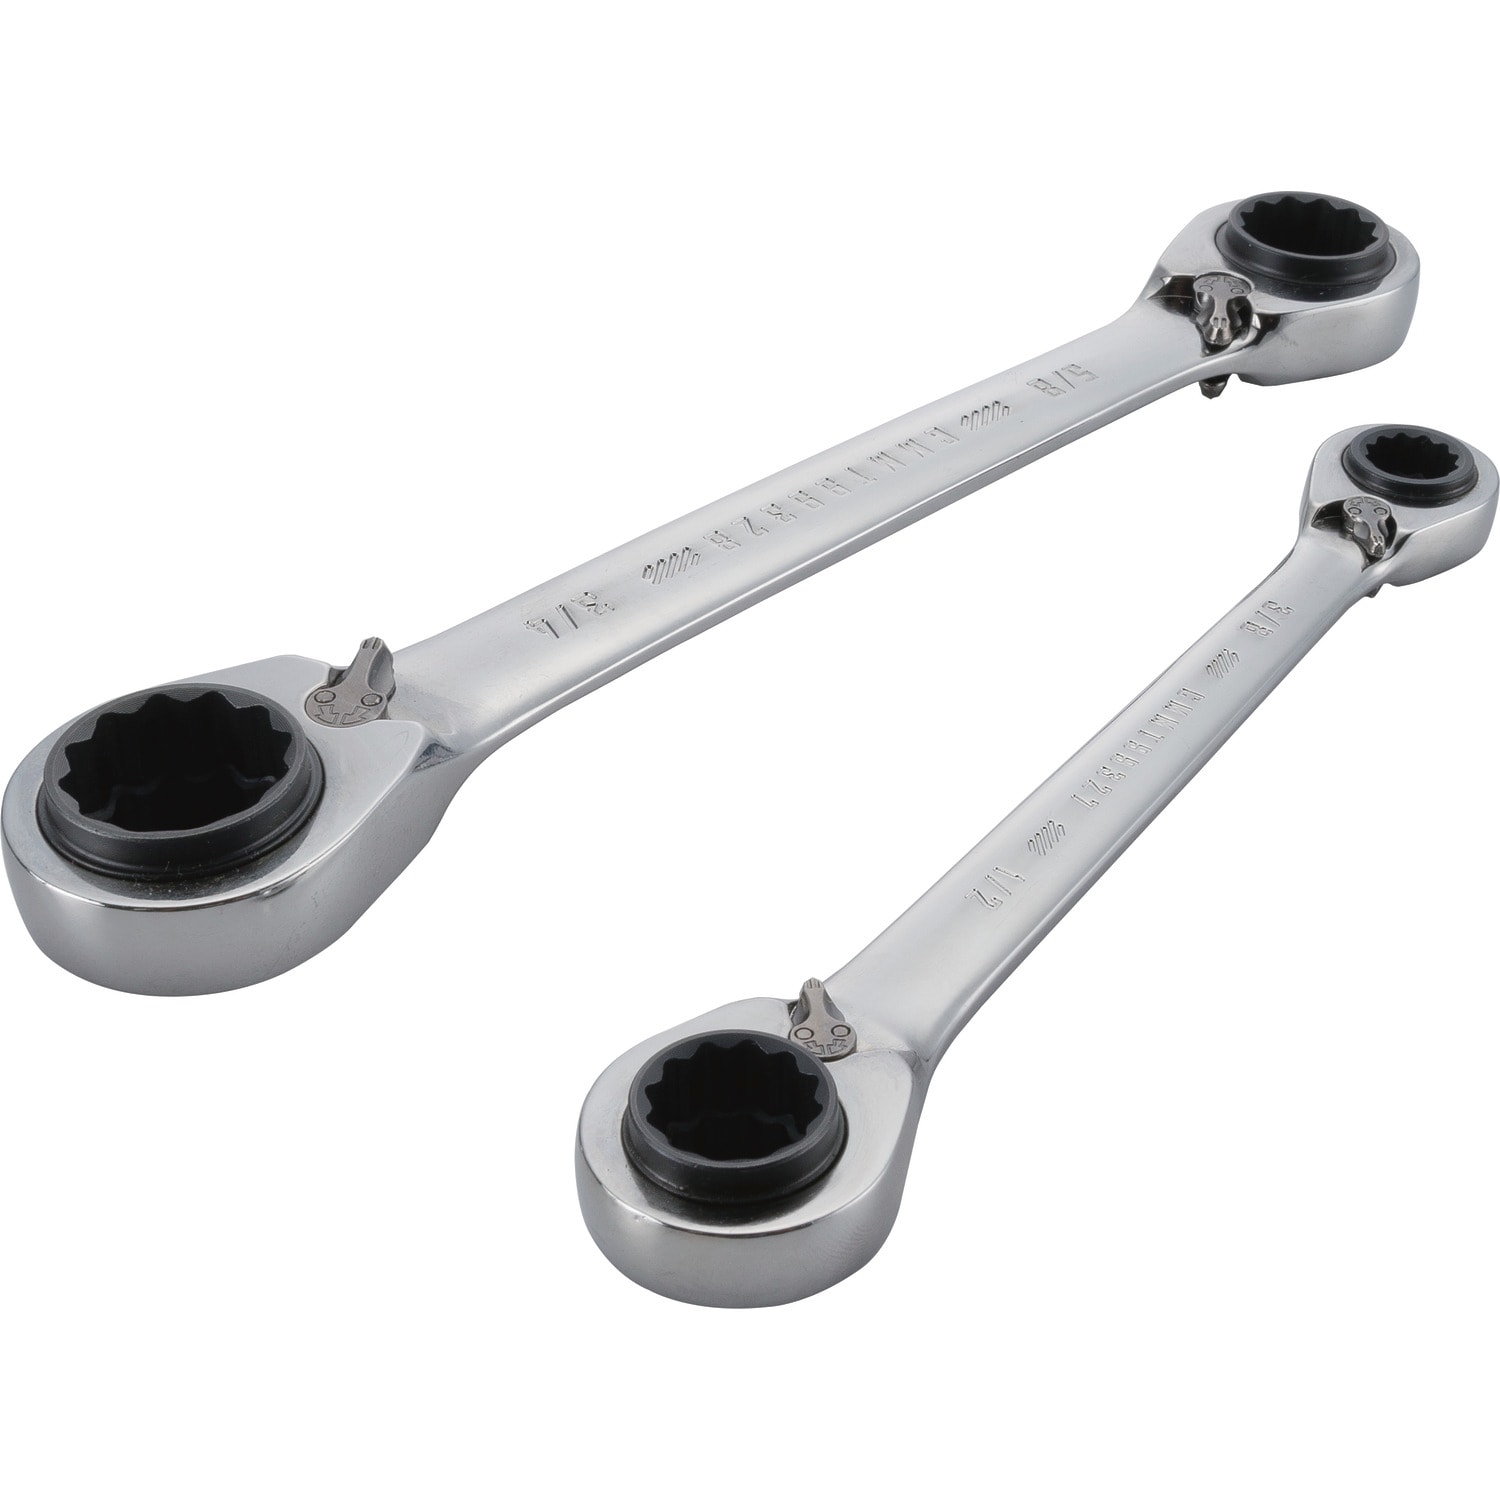 Refrigeration Tool Set - Service Wrench - 5/16 x 1/4 Ratchet Box End - Air  Conditioning Valve Hex Tool (2)